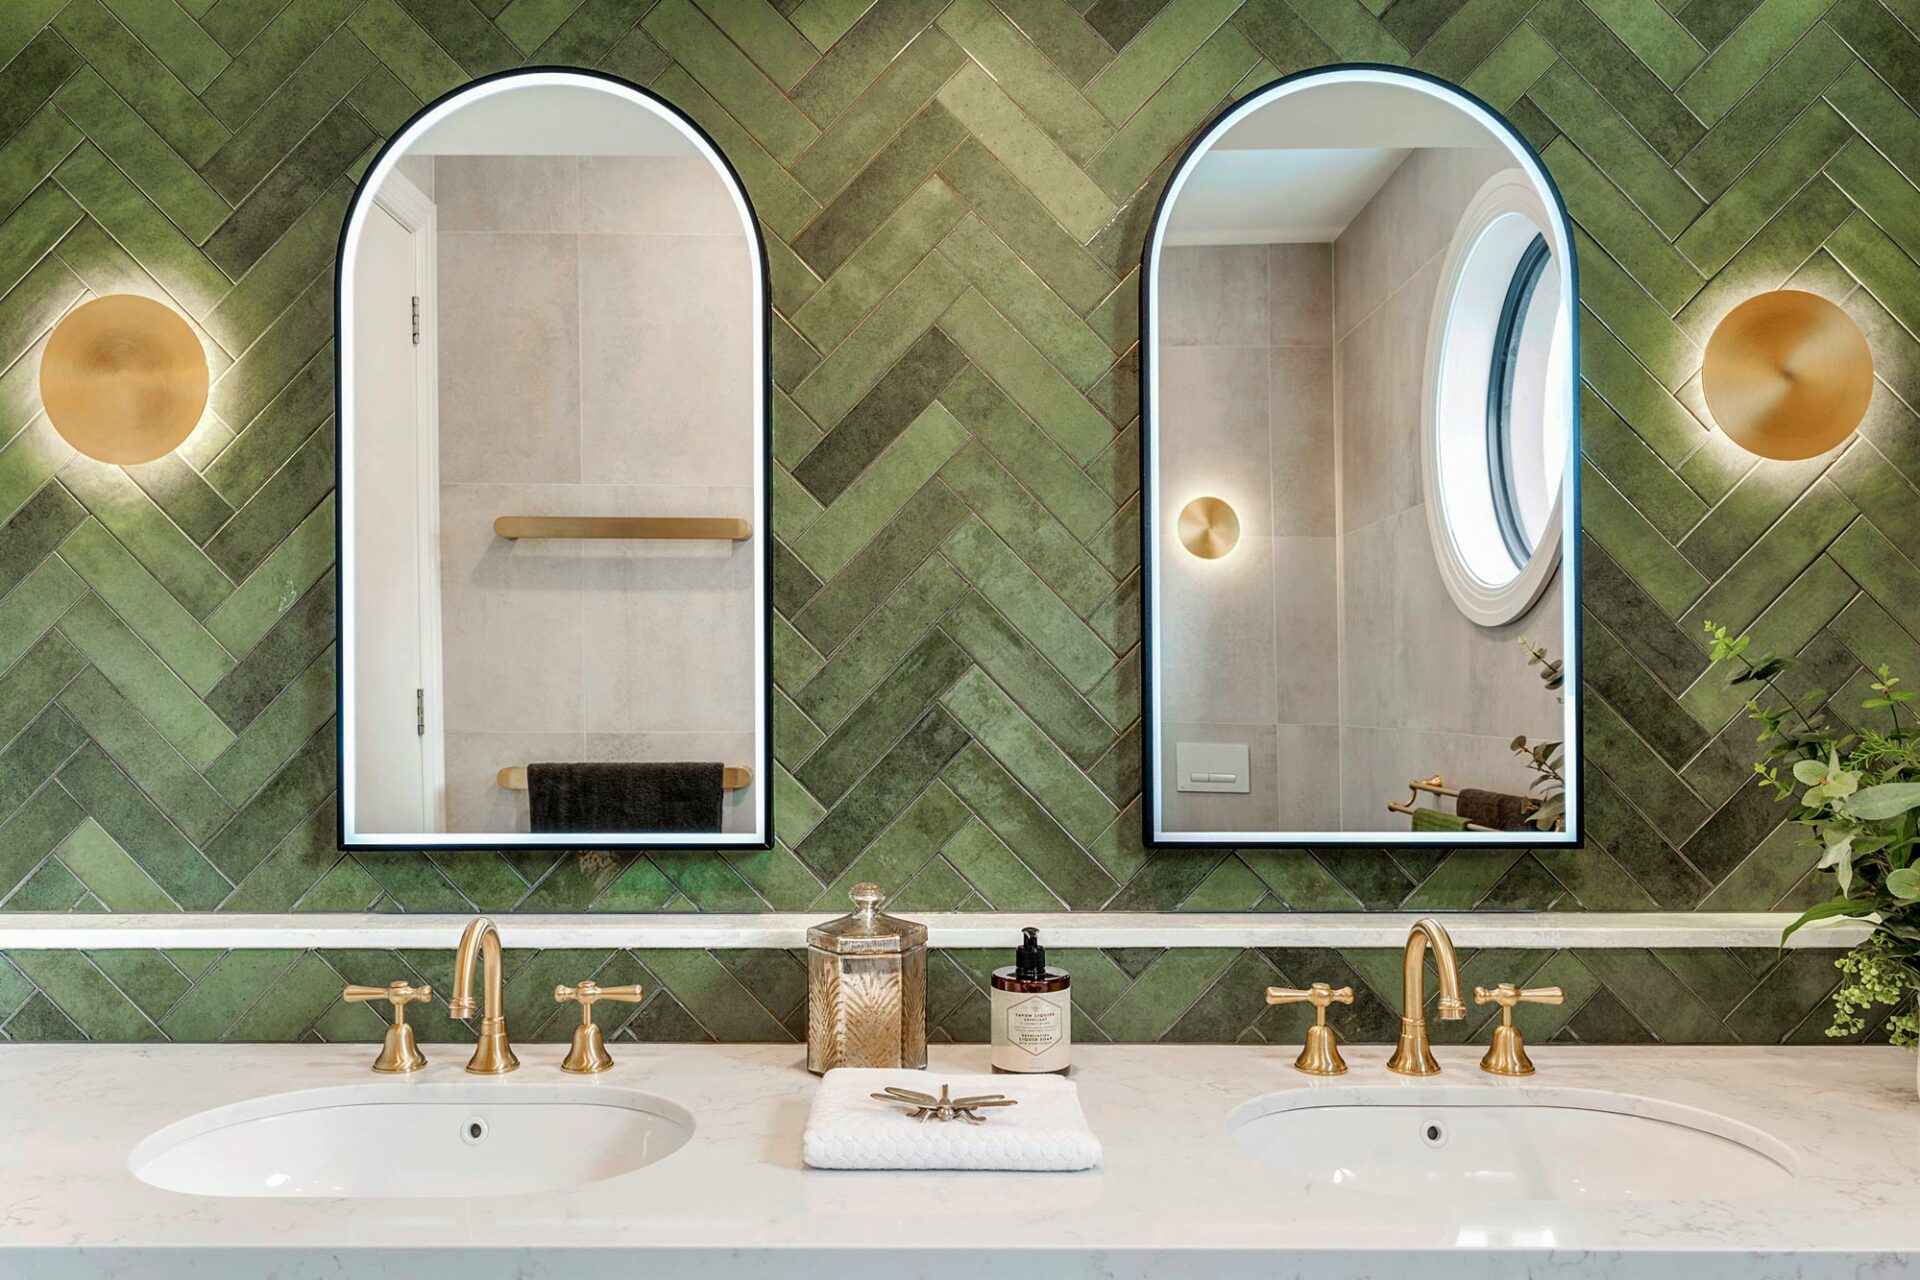 Twin ensuite bathroom, showcasing twin basins and arch mirrors againse green wall tiles